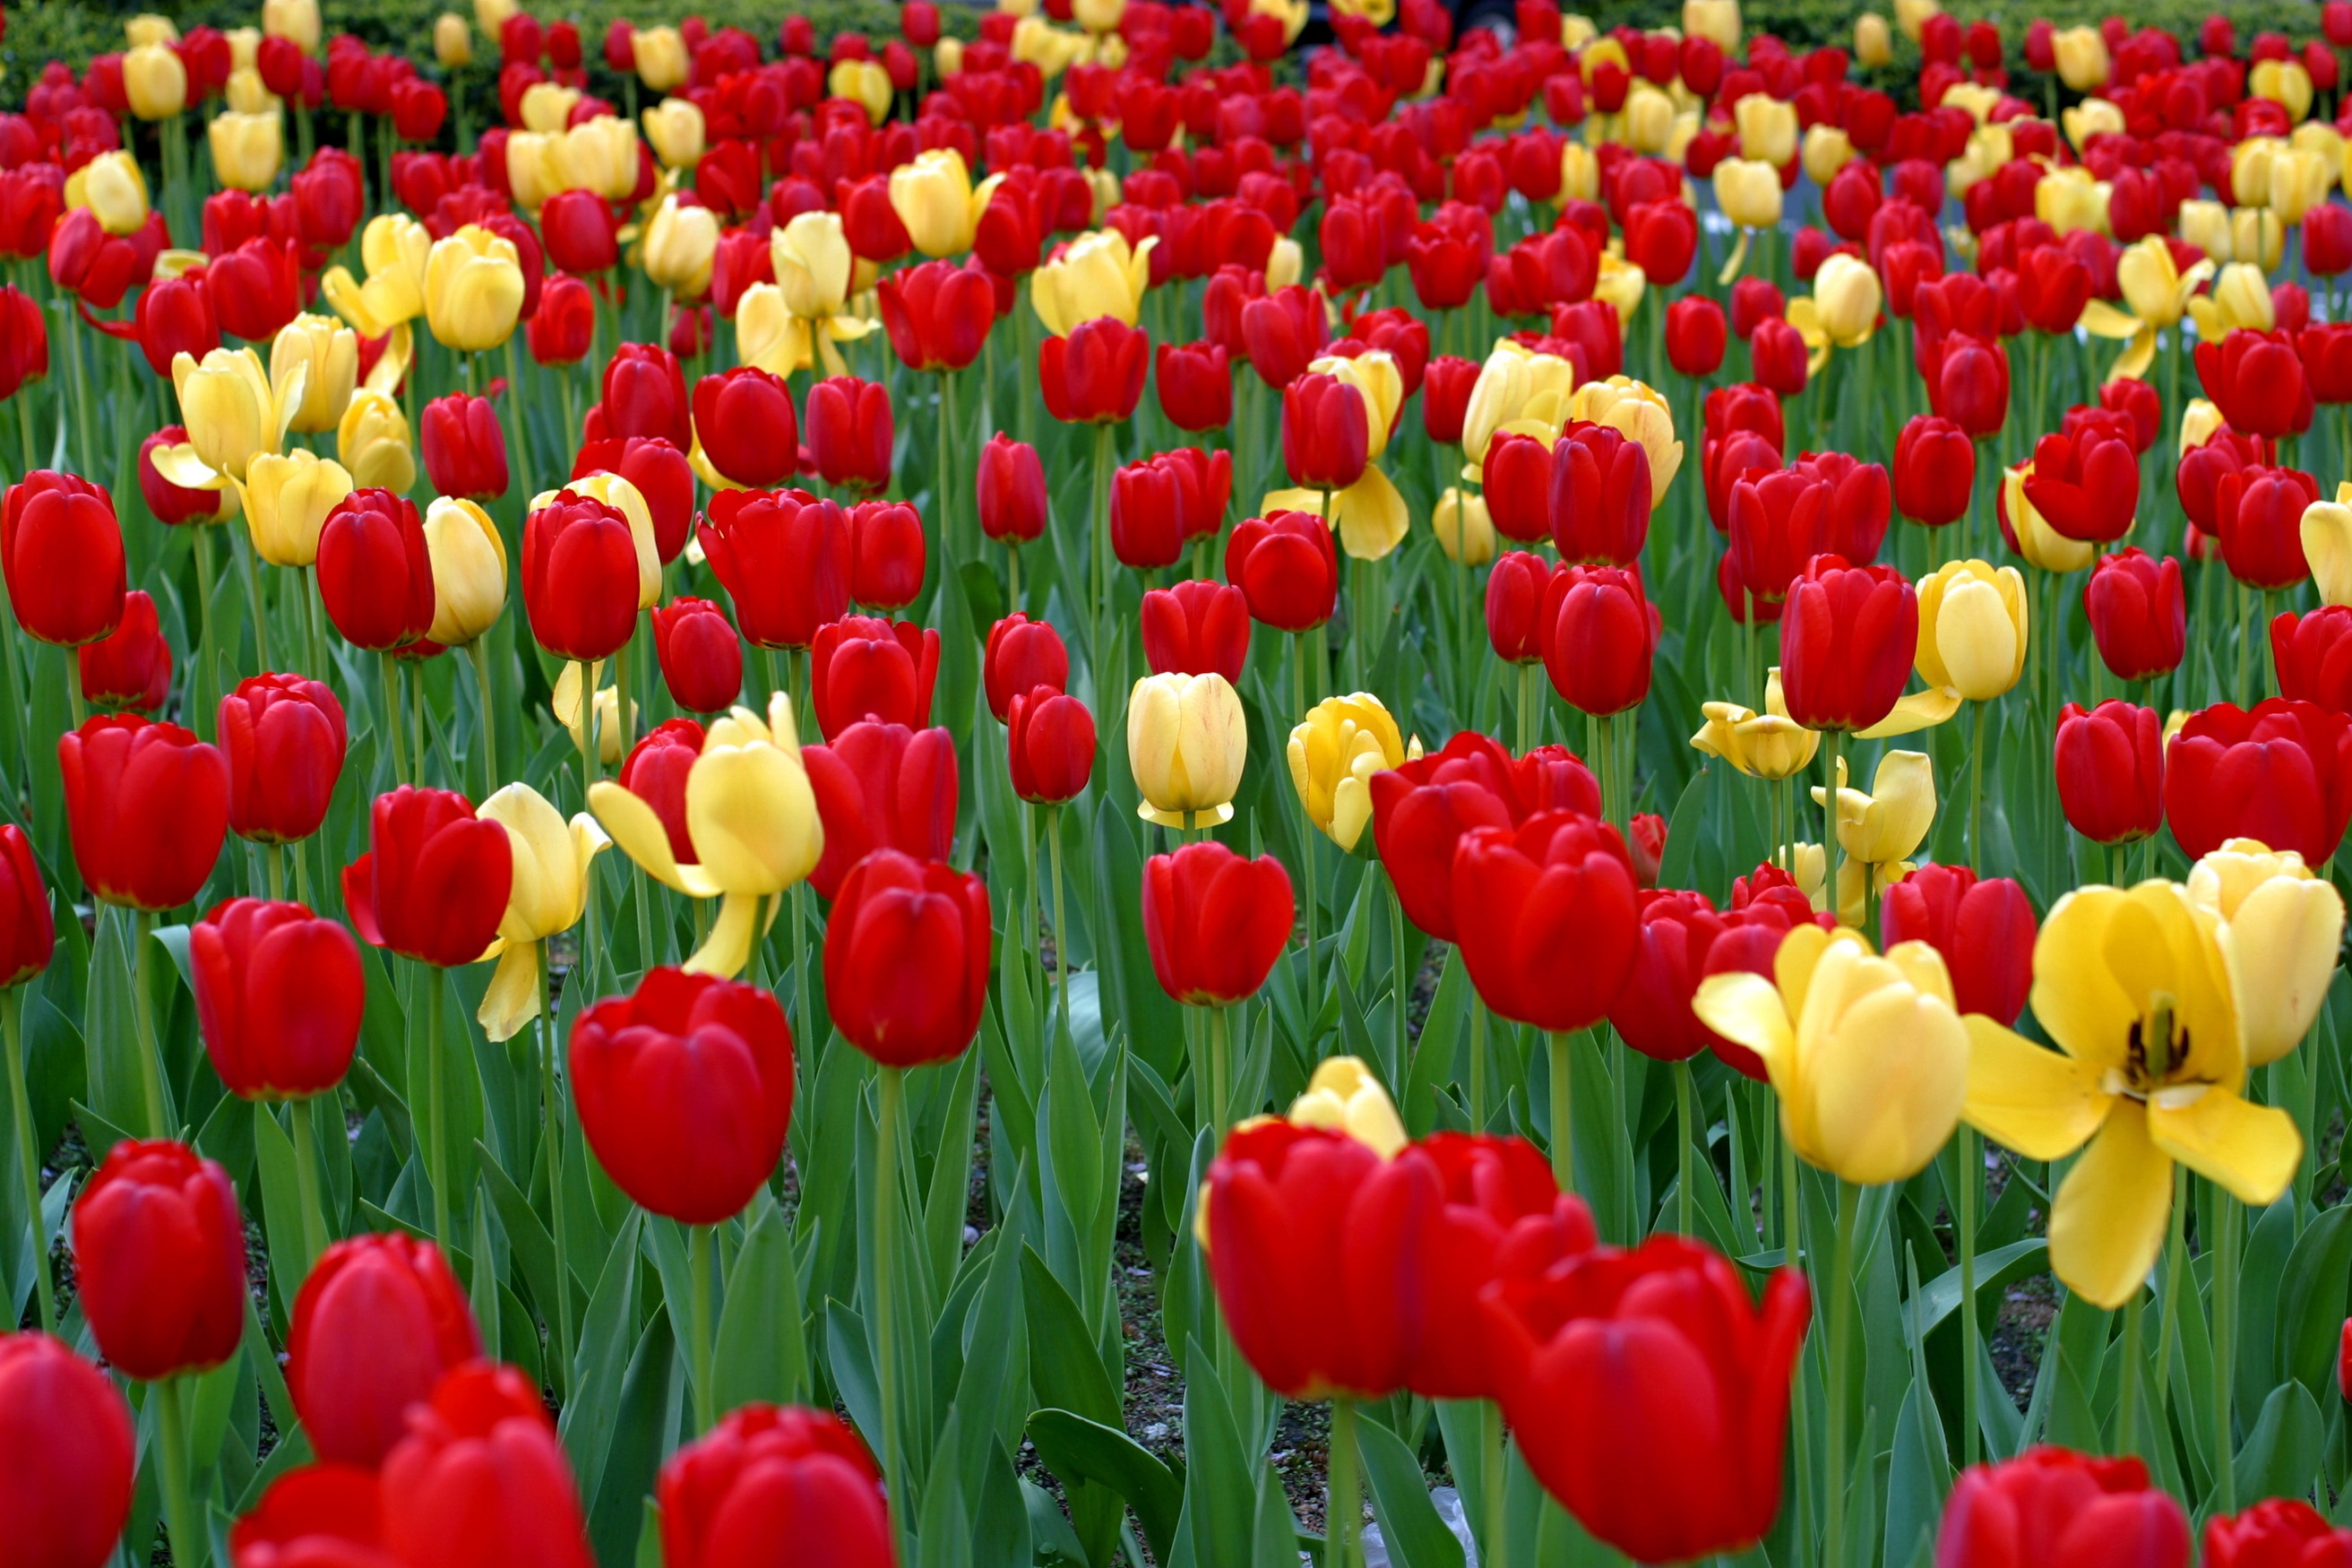 tulips, flowers, yellow, red, greens, flower bed, flowerbed, spring Image for desktop